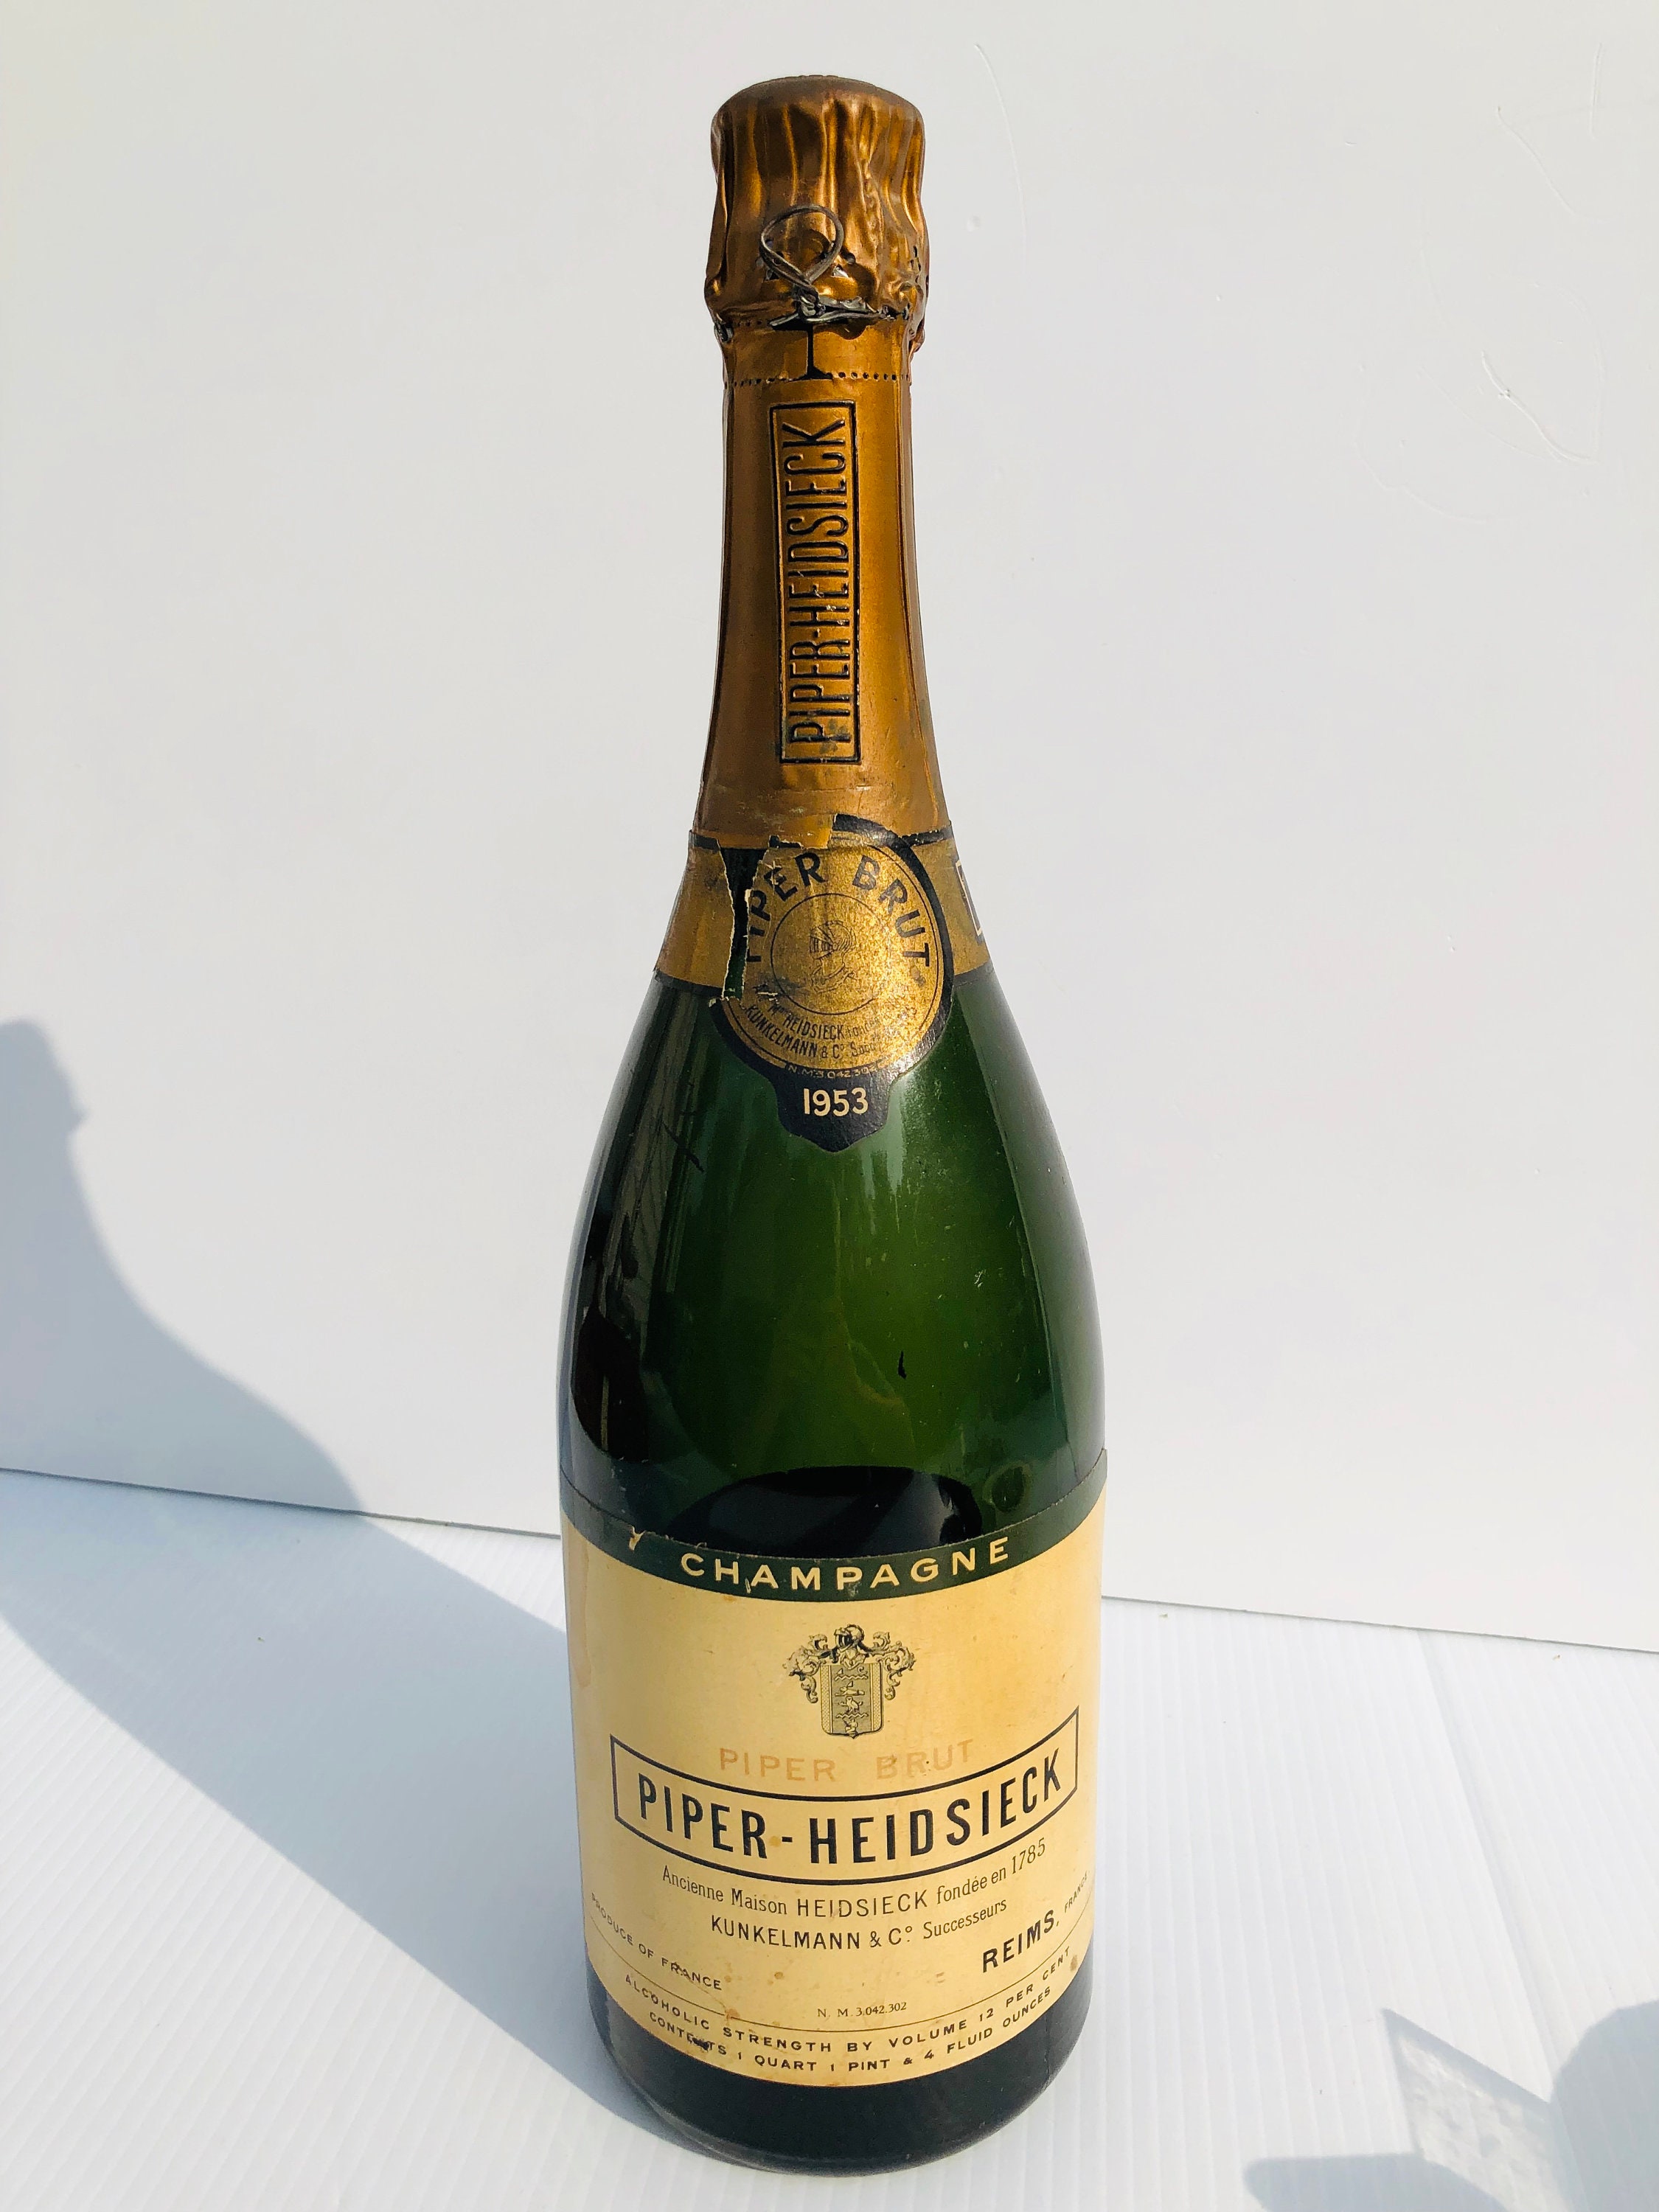 Large, Display 1953 Sealed, Reims Extra - Champagne MCM Bottle, Empty, Etsy Bar Collectible Vintage, Piper France Heidsieck Champagne Bottle, Brut,